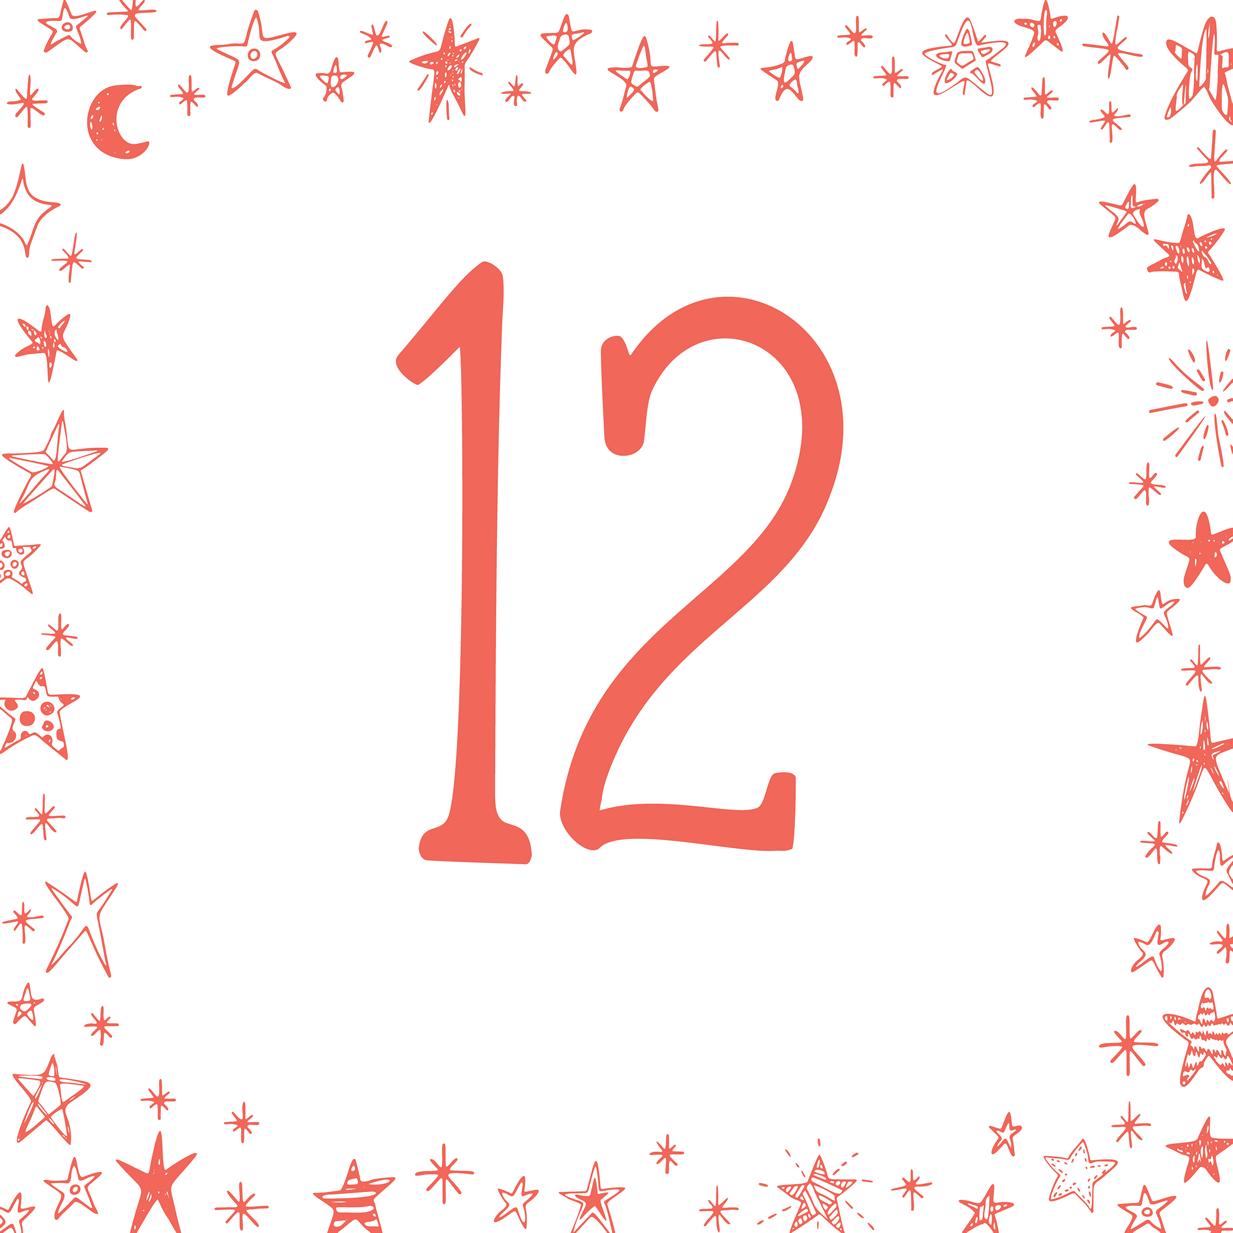 Image name yorkshire advent calendar 2022 day 12 the 11 image from the post Day 12 - Christmas 2022 in Yorkshire.com.